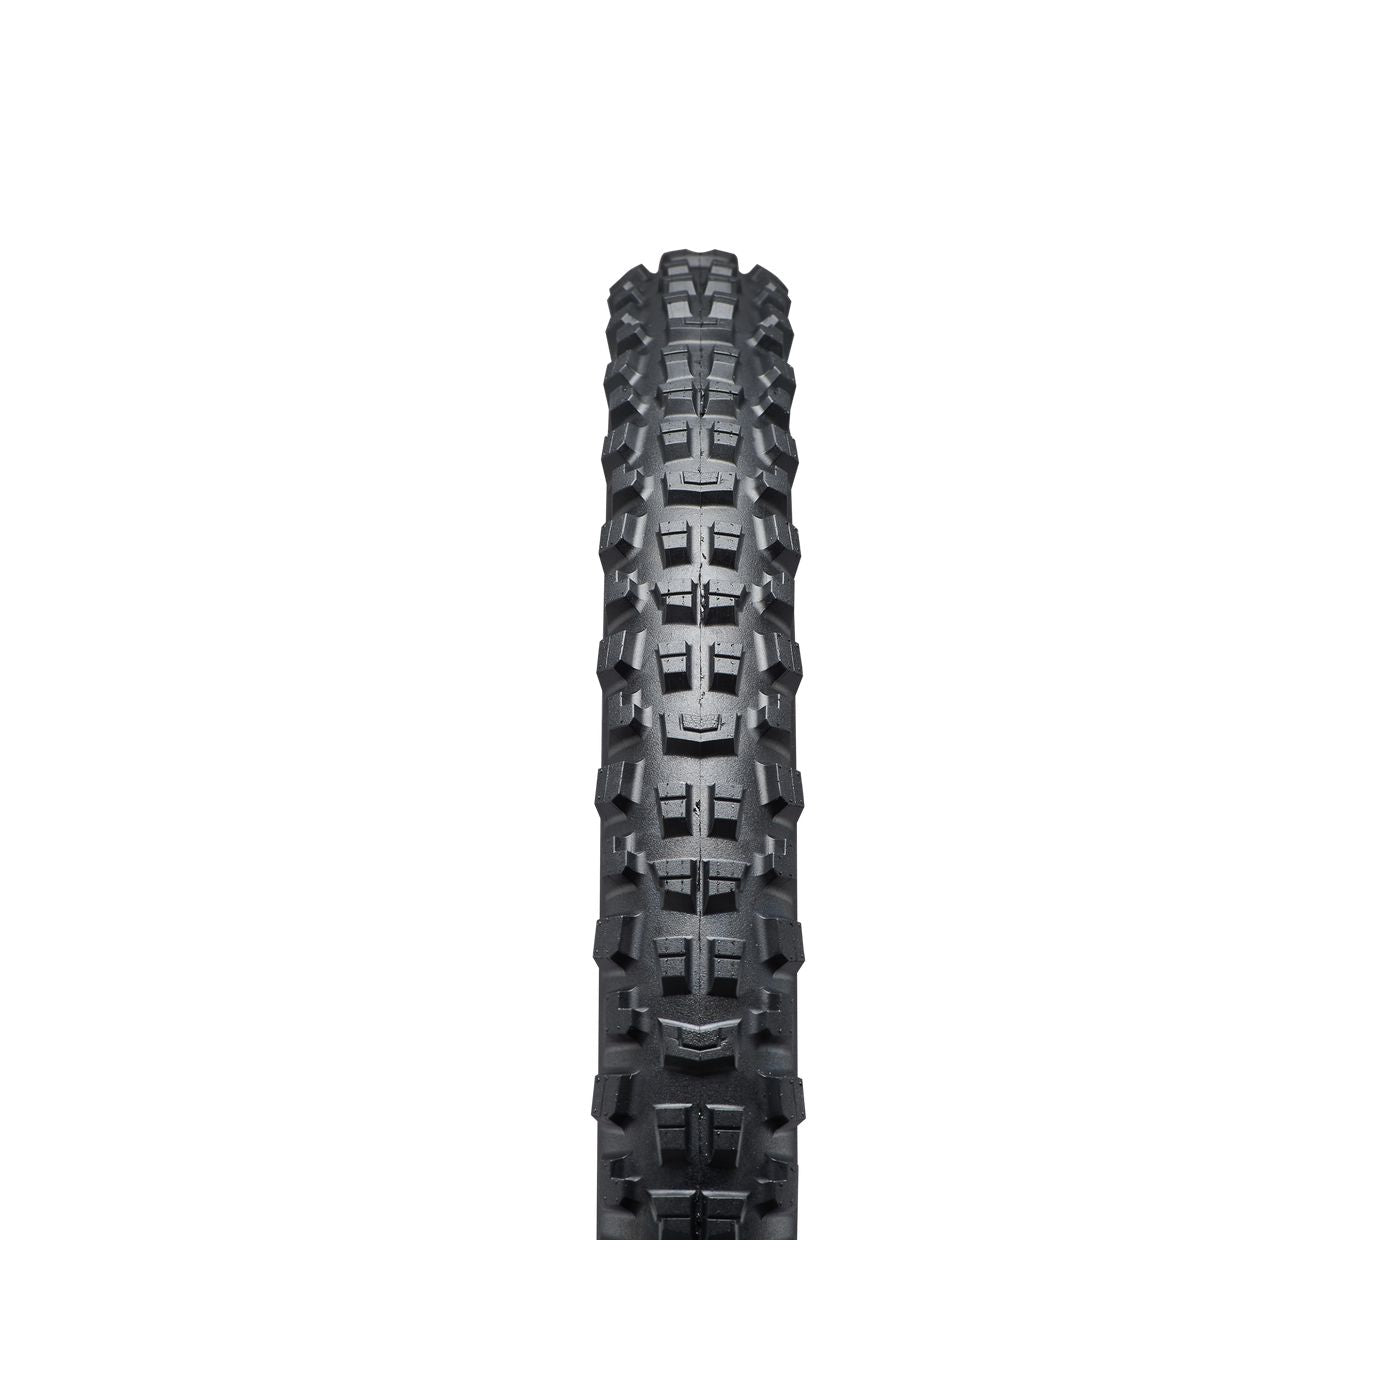 Specialized Cannibal Grid Gravity 2Bliss Ready T9 27.5" Bike Tire - Tires - Bicycle Warehouse